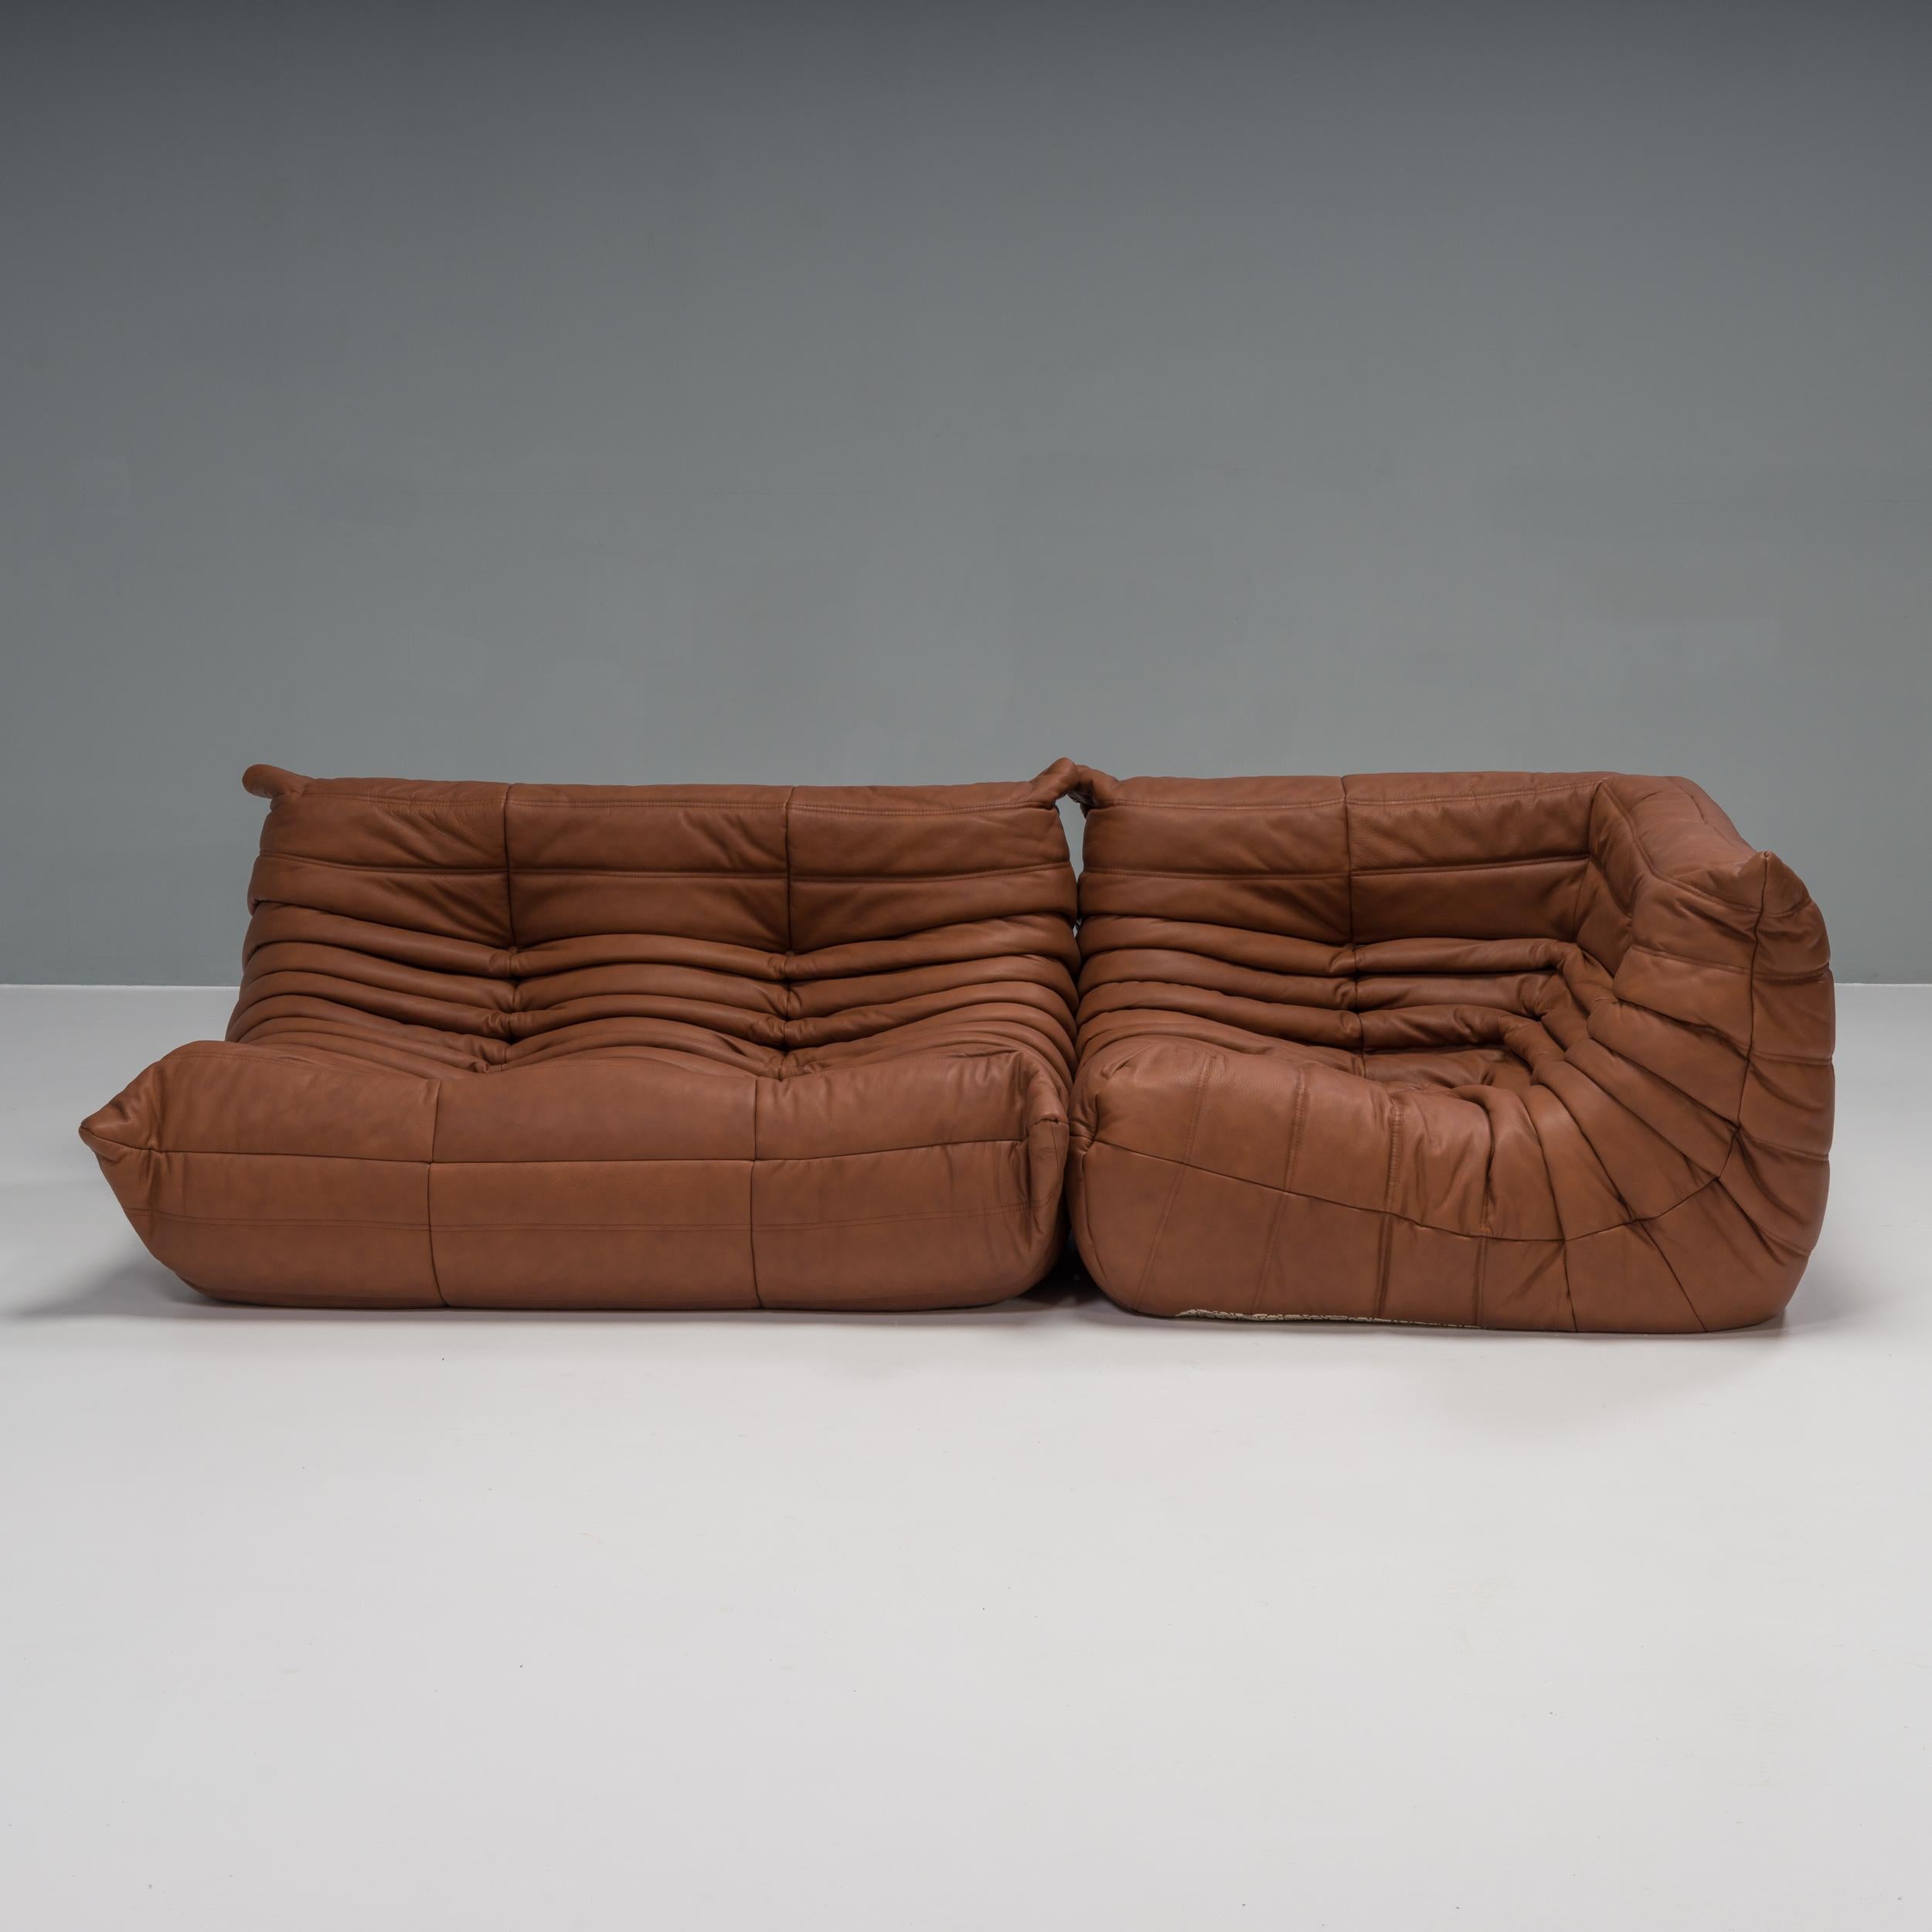 The iconic Togo sofa, originally designed by Michel Ducaroy for Ligne Roset in 1973, has become a design classic.

This two-piece modular set is incredibly versatile and can be configured into one corner sofa or used separately.

Comprising one